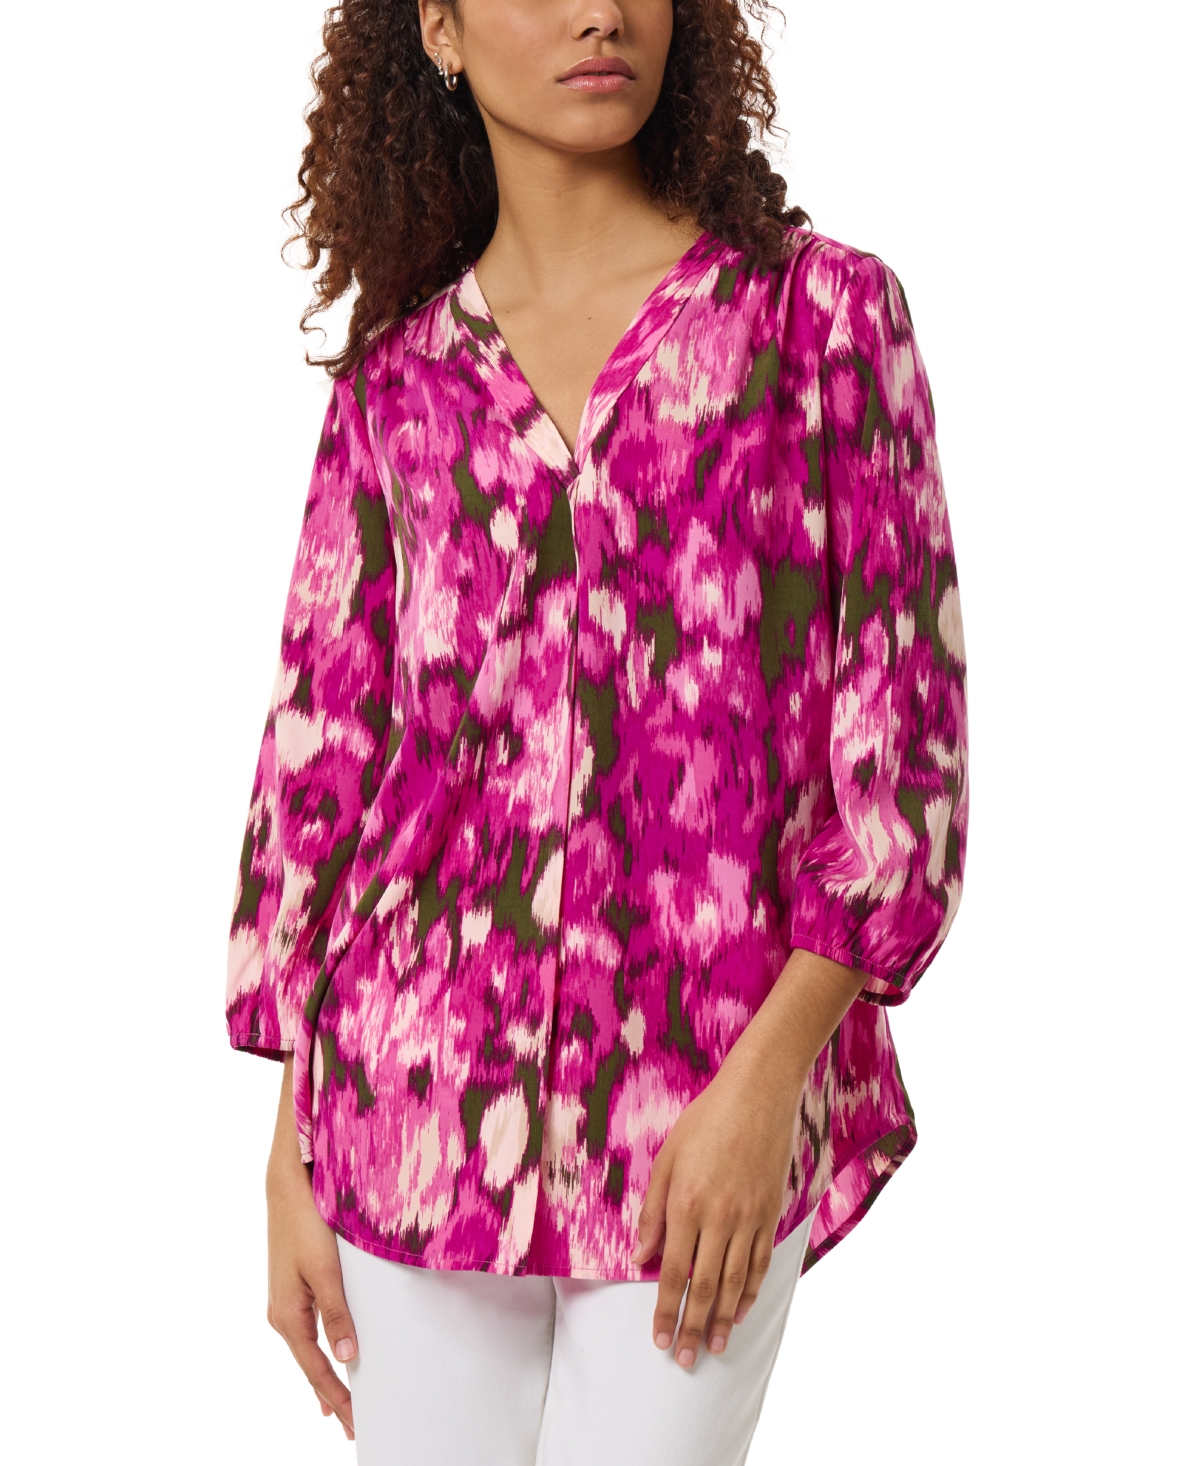 Petite Printed 3/4-Sleeve Tunic - Bright Orchid